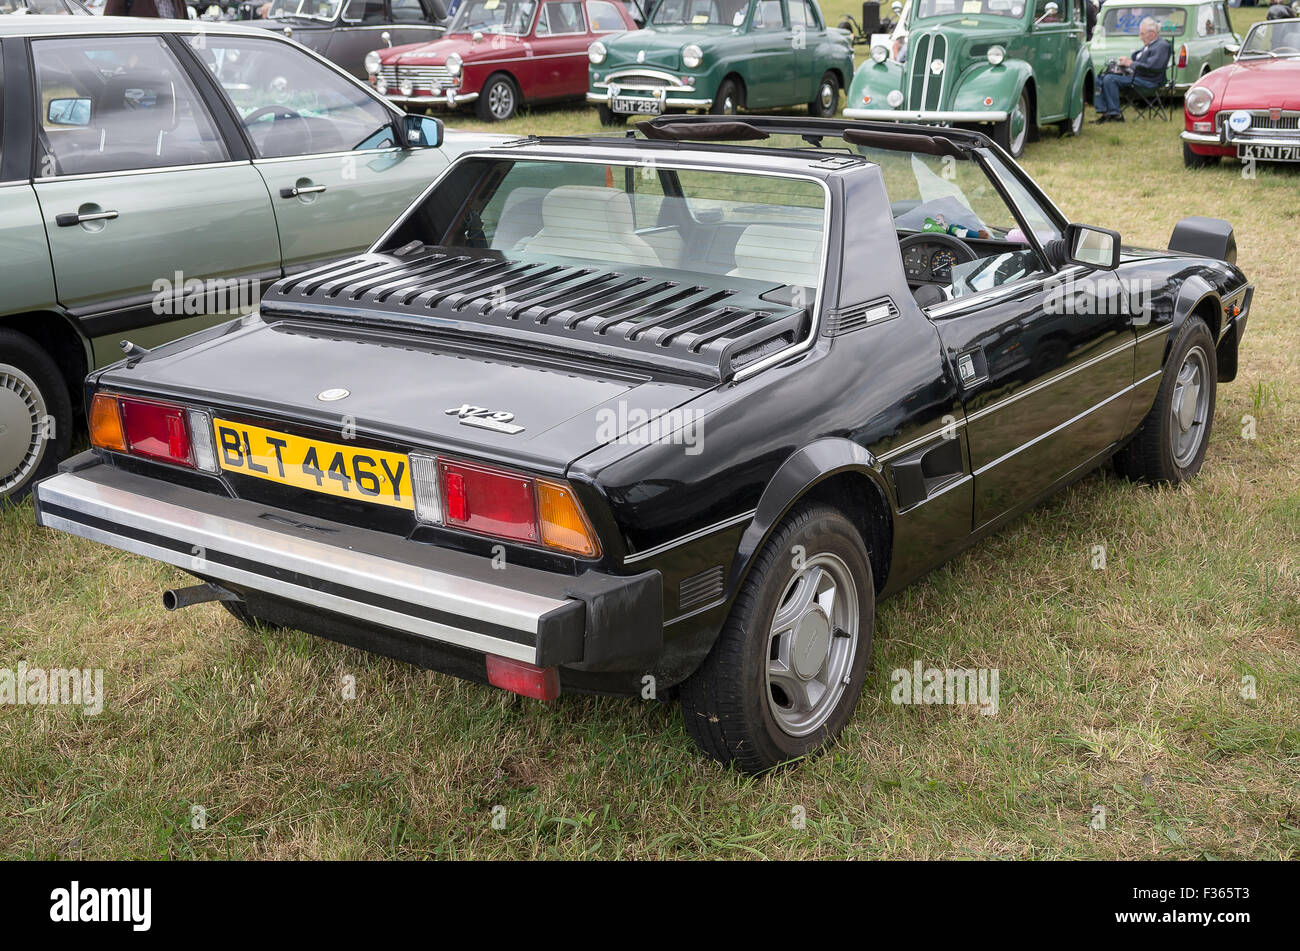 Fiat sports car at an English show 2015 Stock Photo